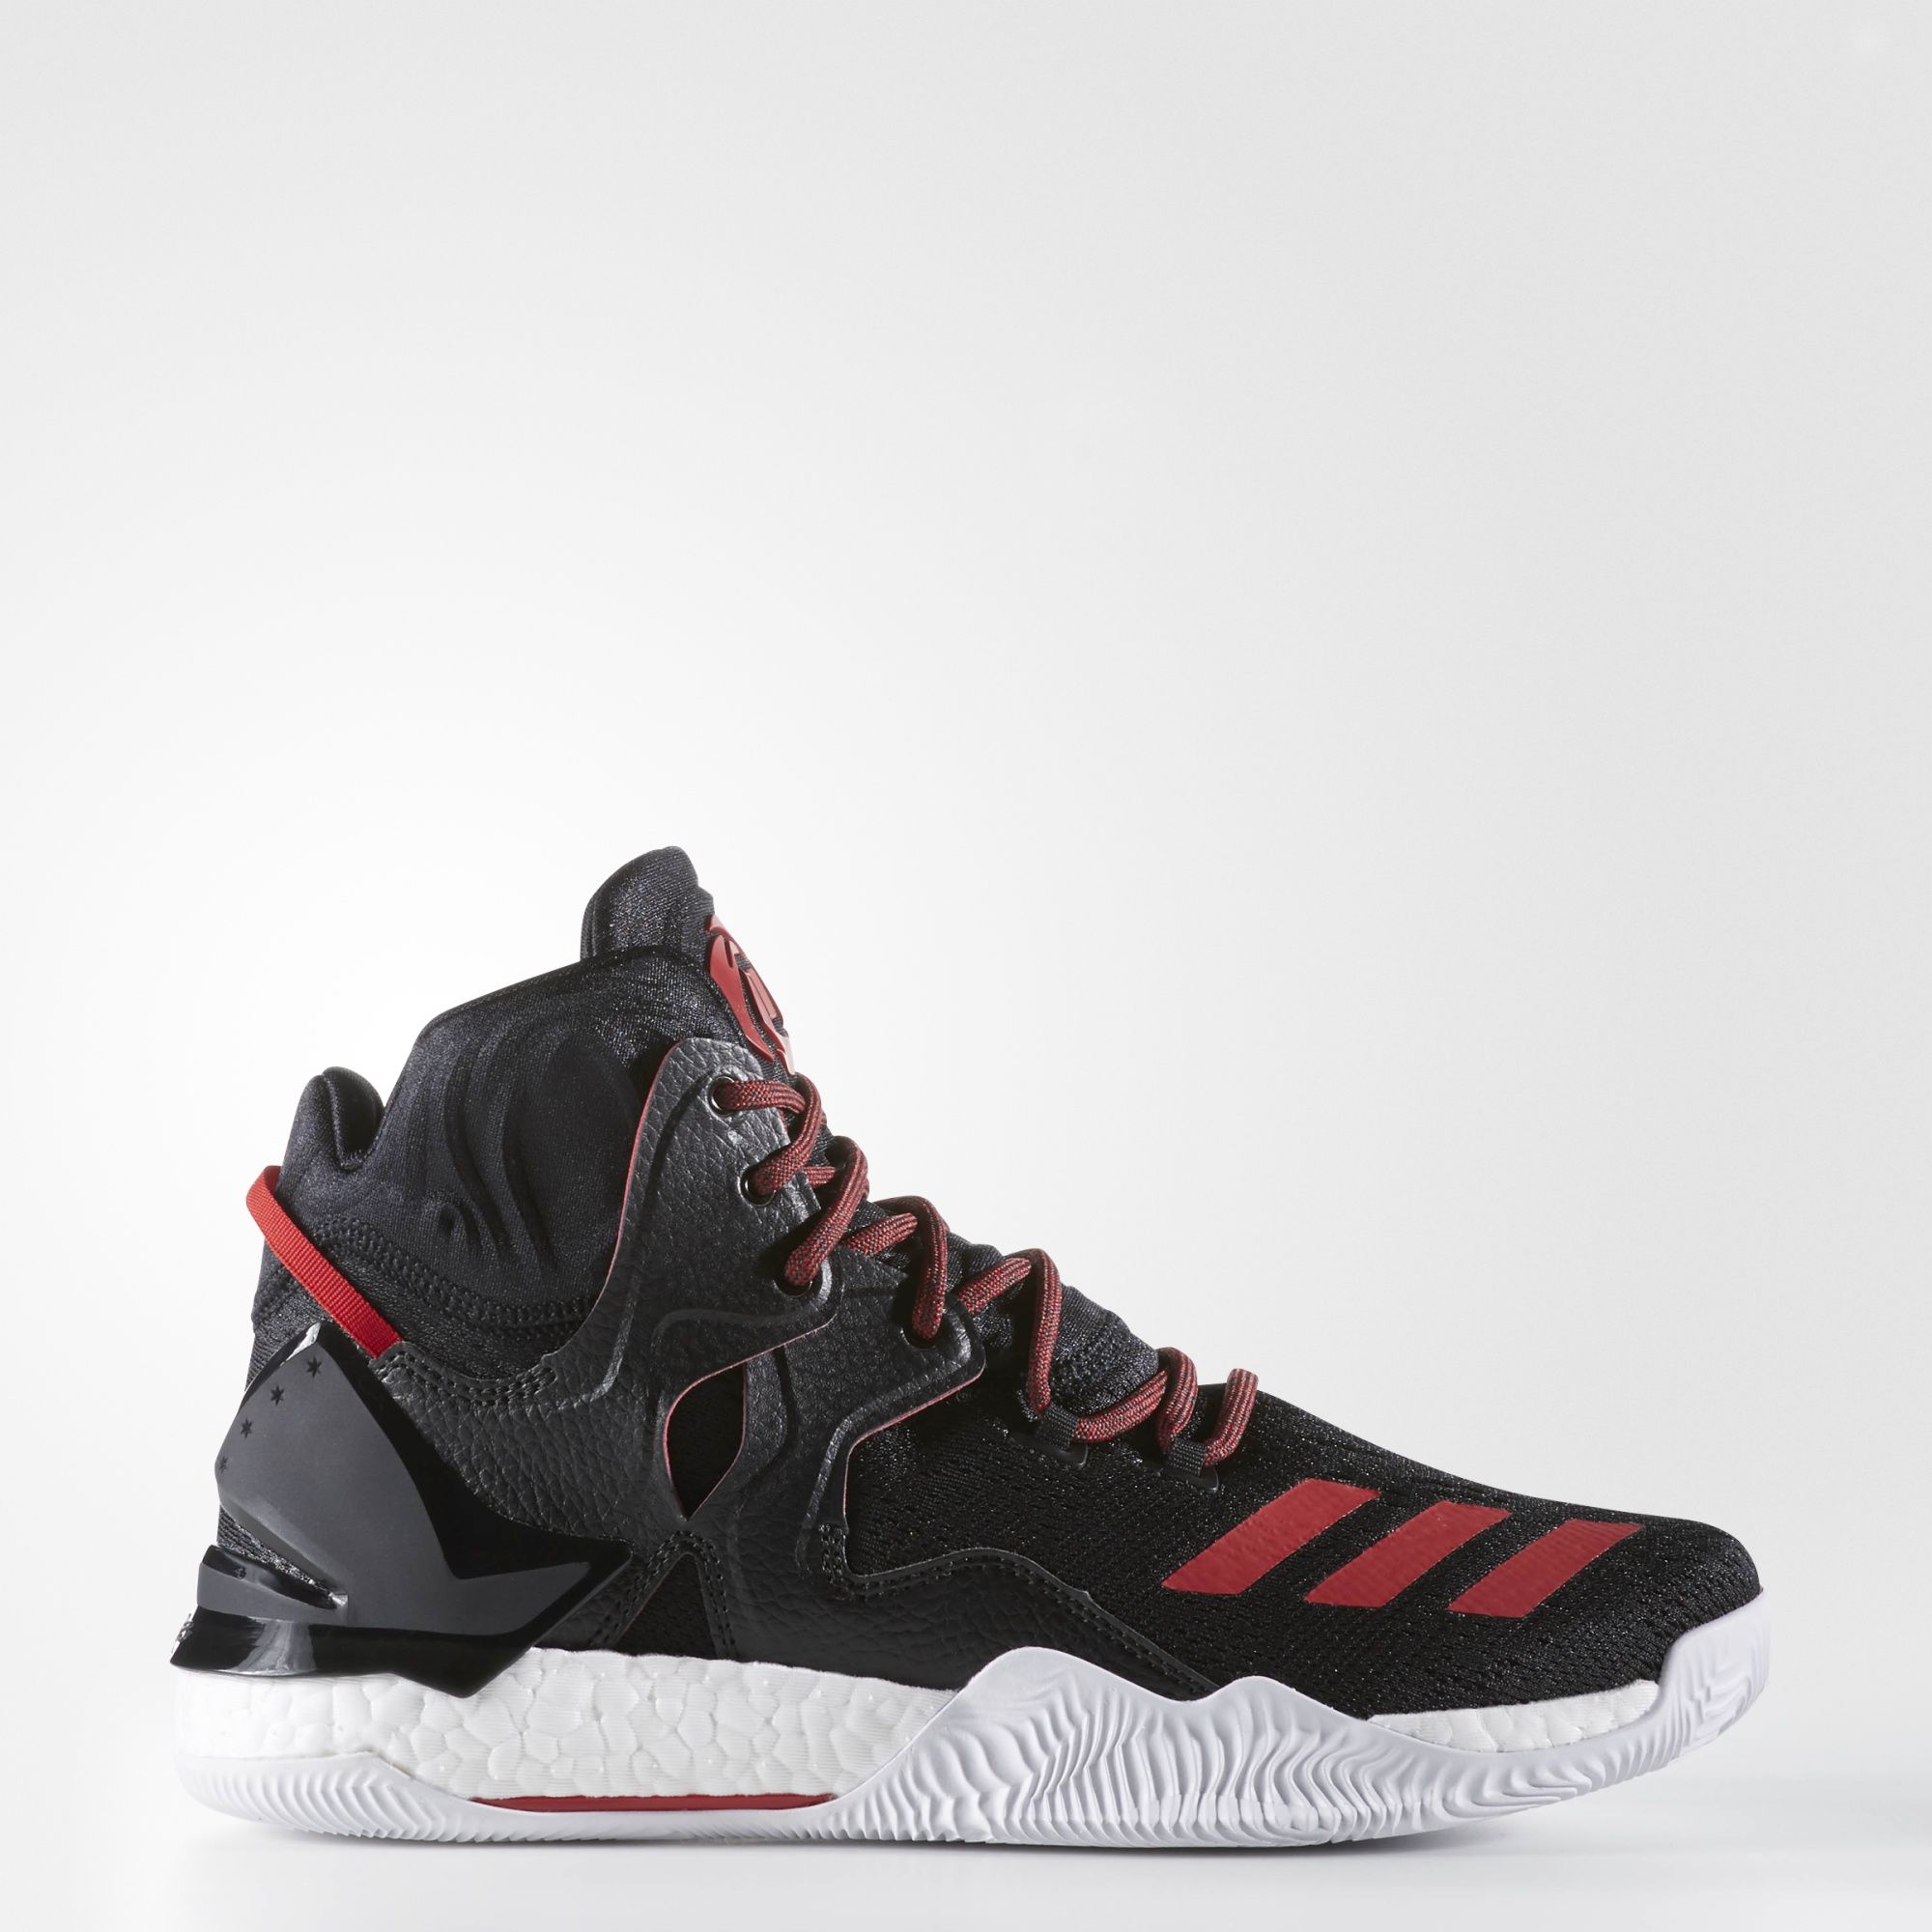 The adidas Rose 7 in Black/Scarlet is Available Now - WearTesters